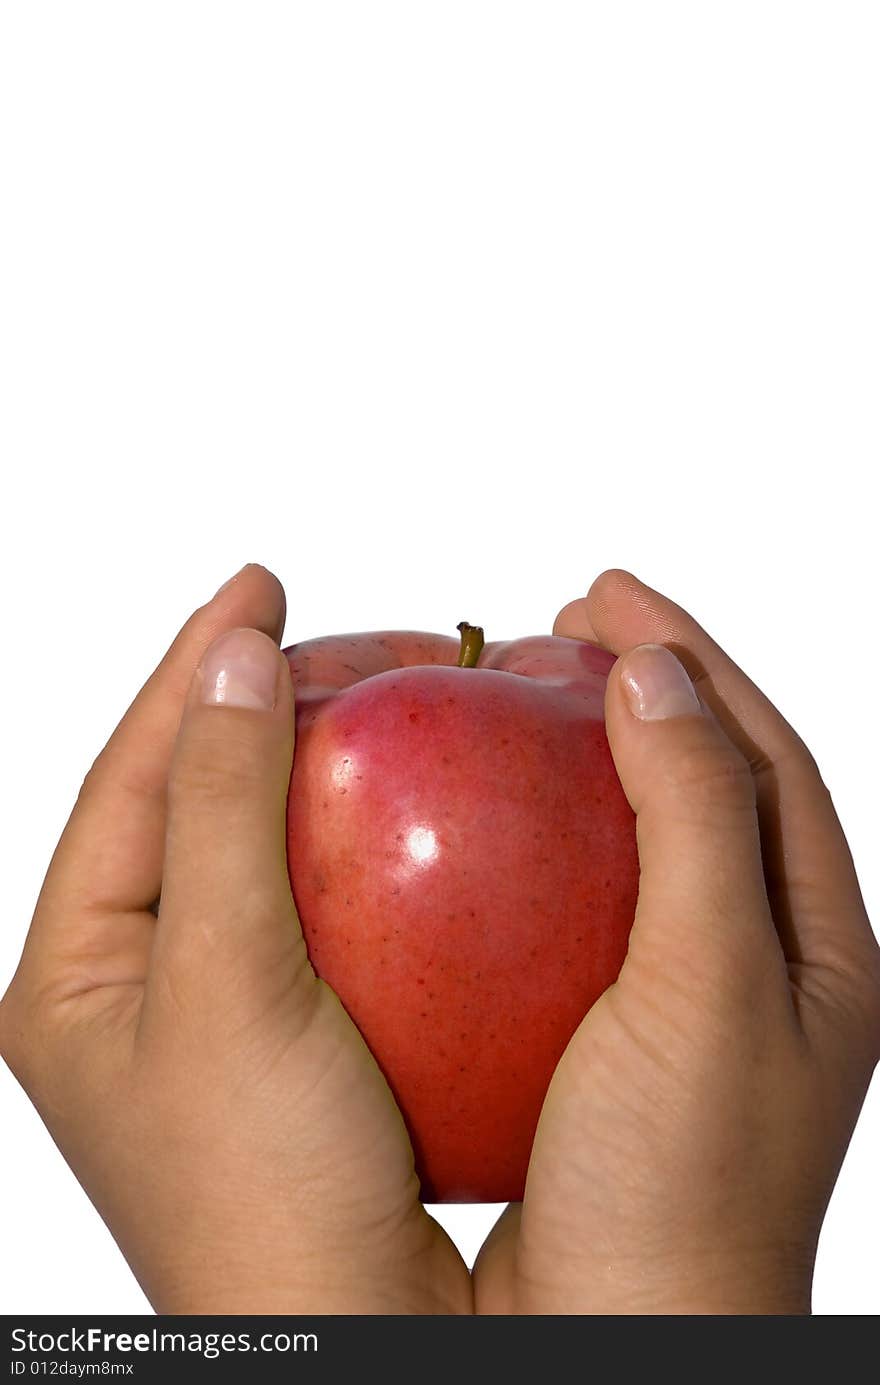 Woman hands holding a red apple. Woman hands holding a red apple.